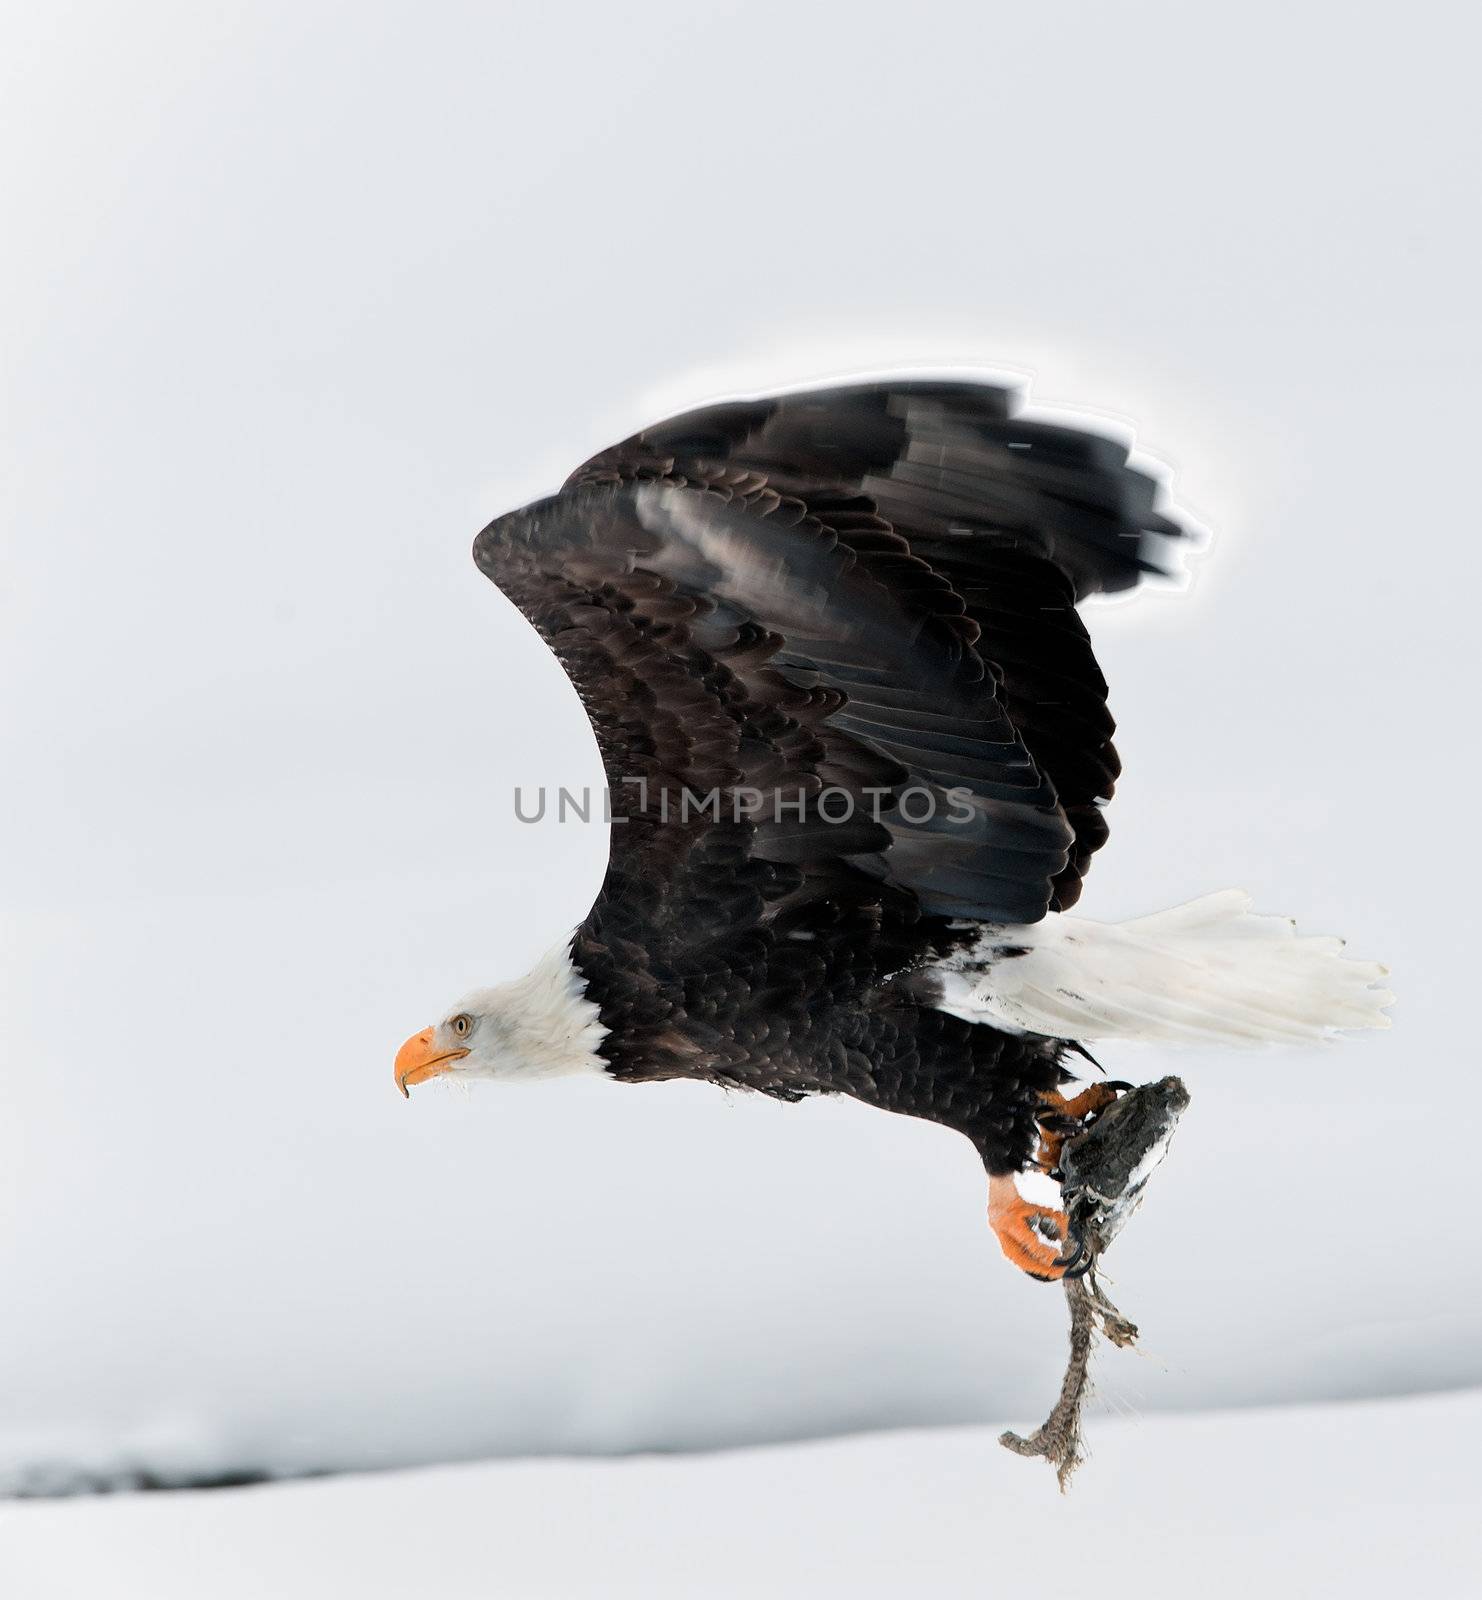 Flying Bald eagle with the fish clamped in claws.Haliaeetus leucocephalus washingtoniensis